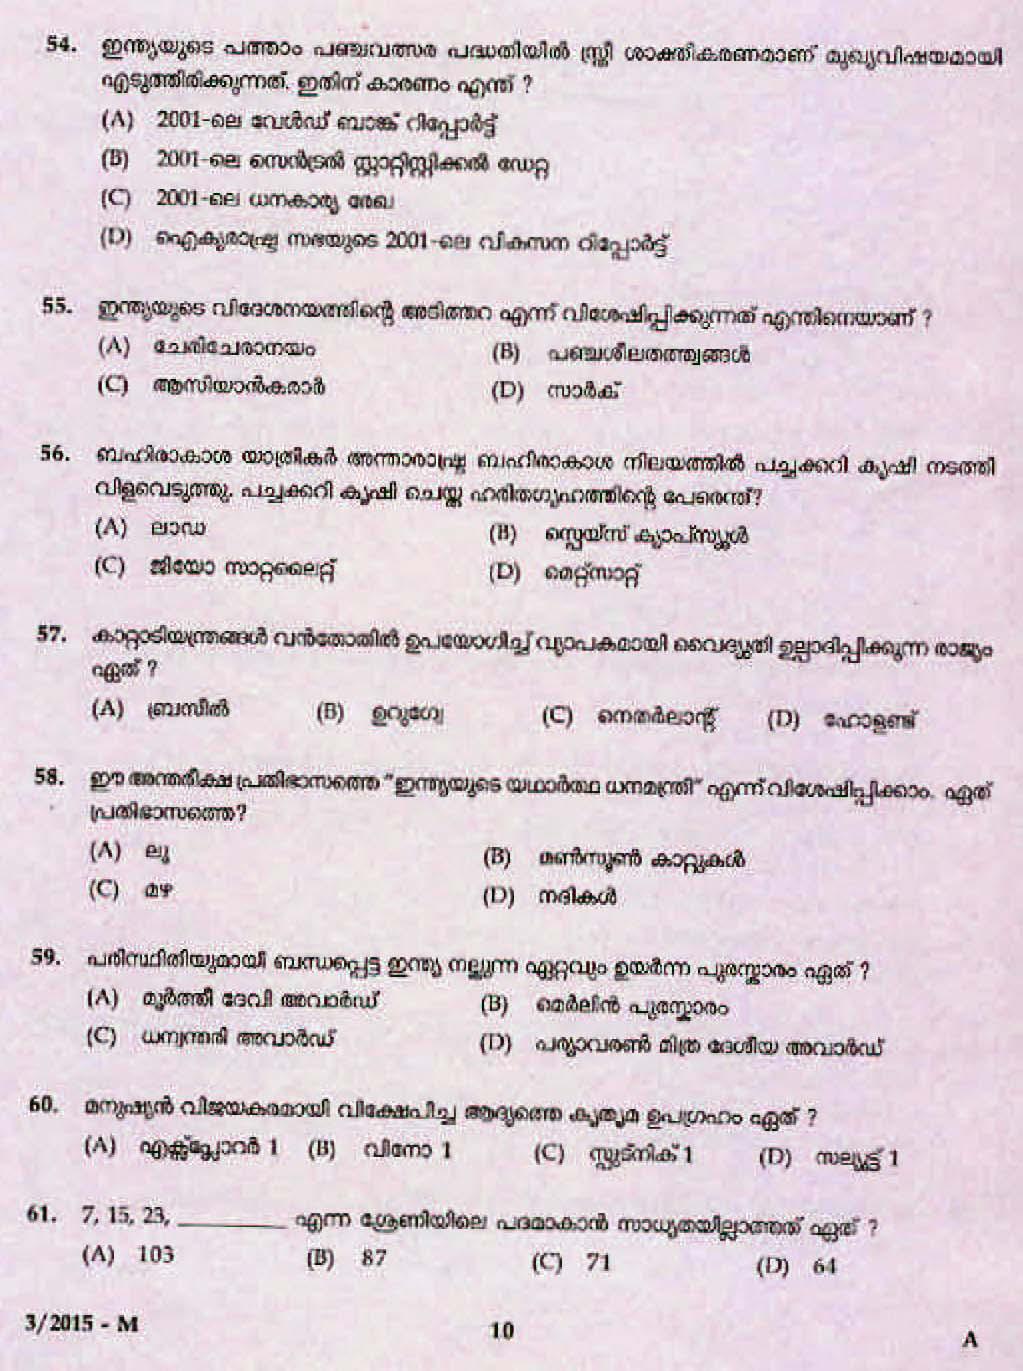 LD Clerk Thrissur District Question Paper Malayalam 2015 Paper Code 32015 M 8